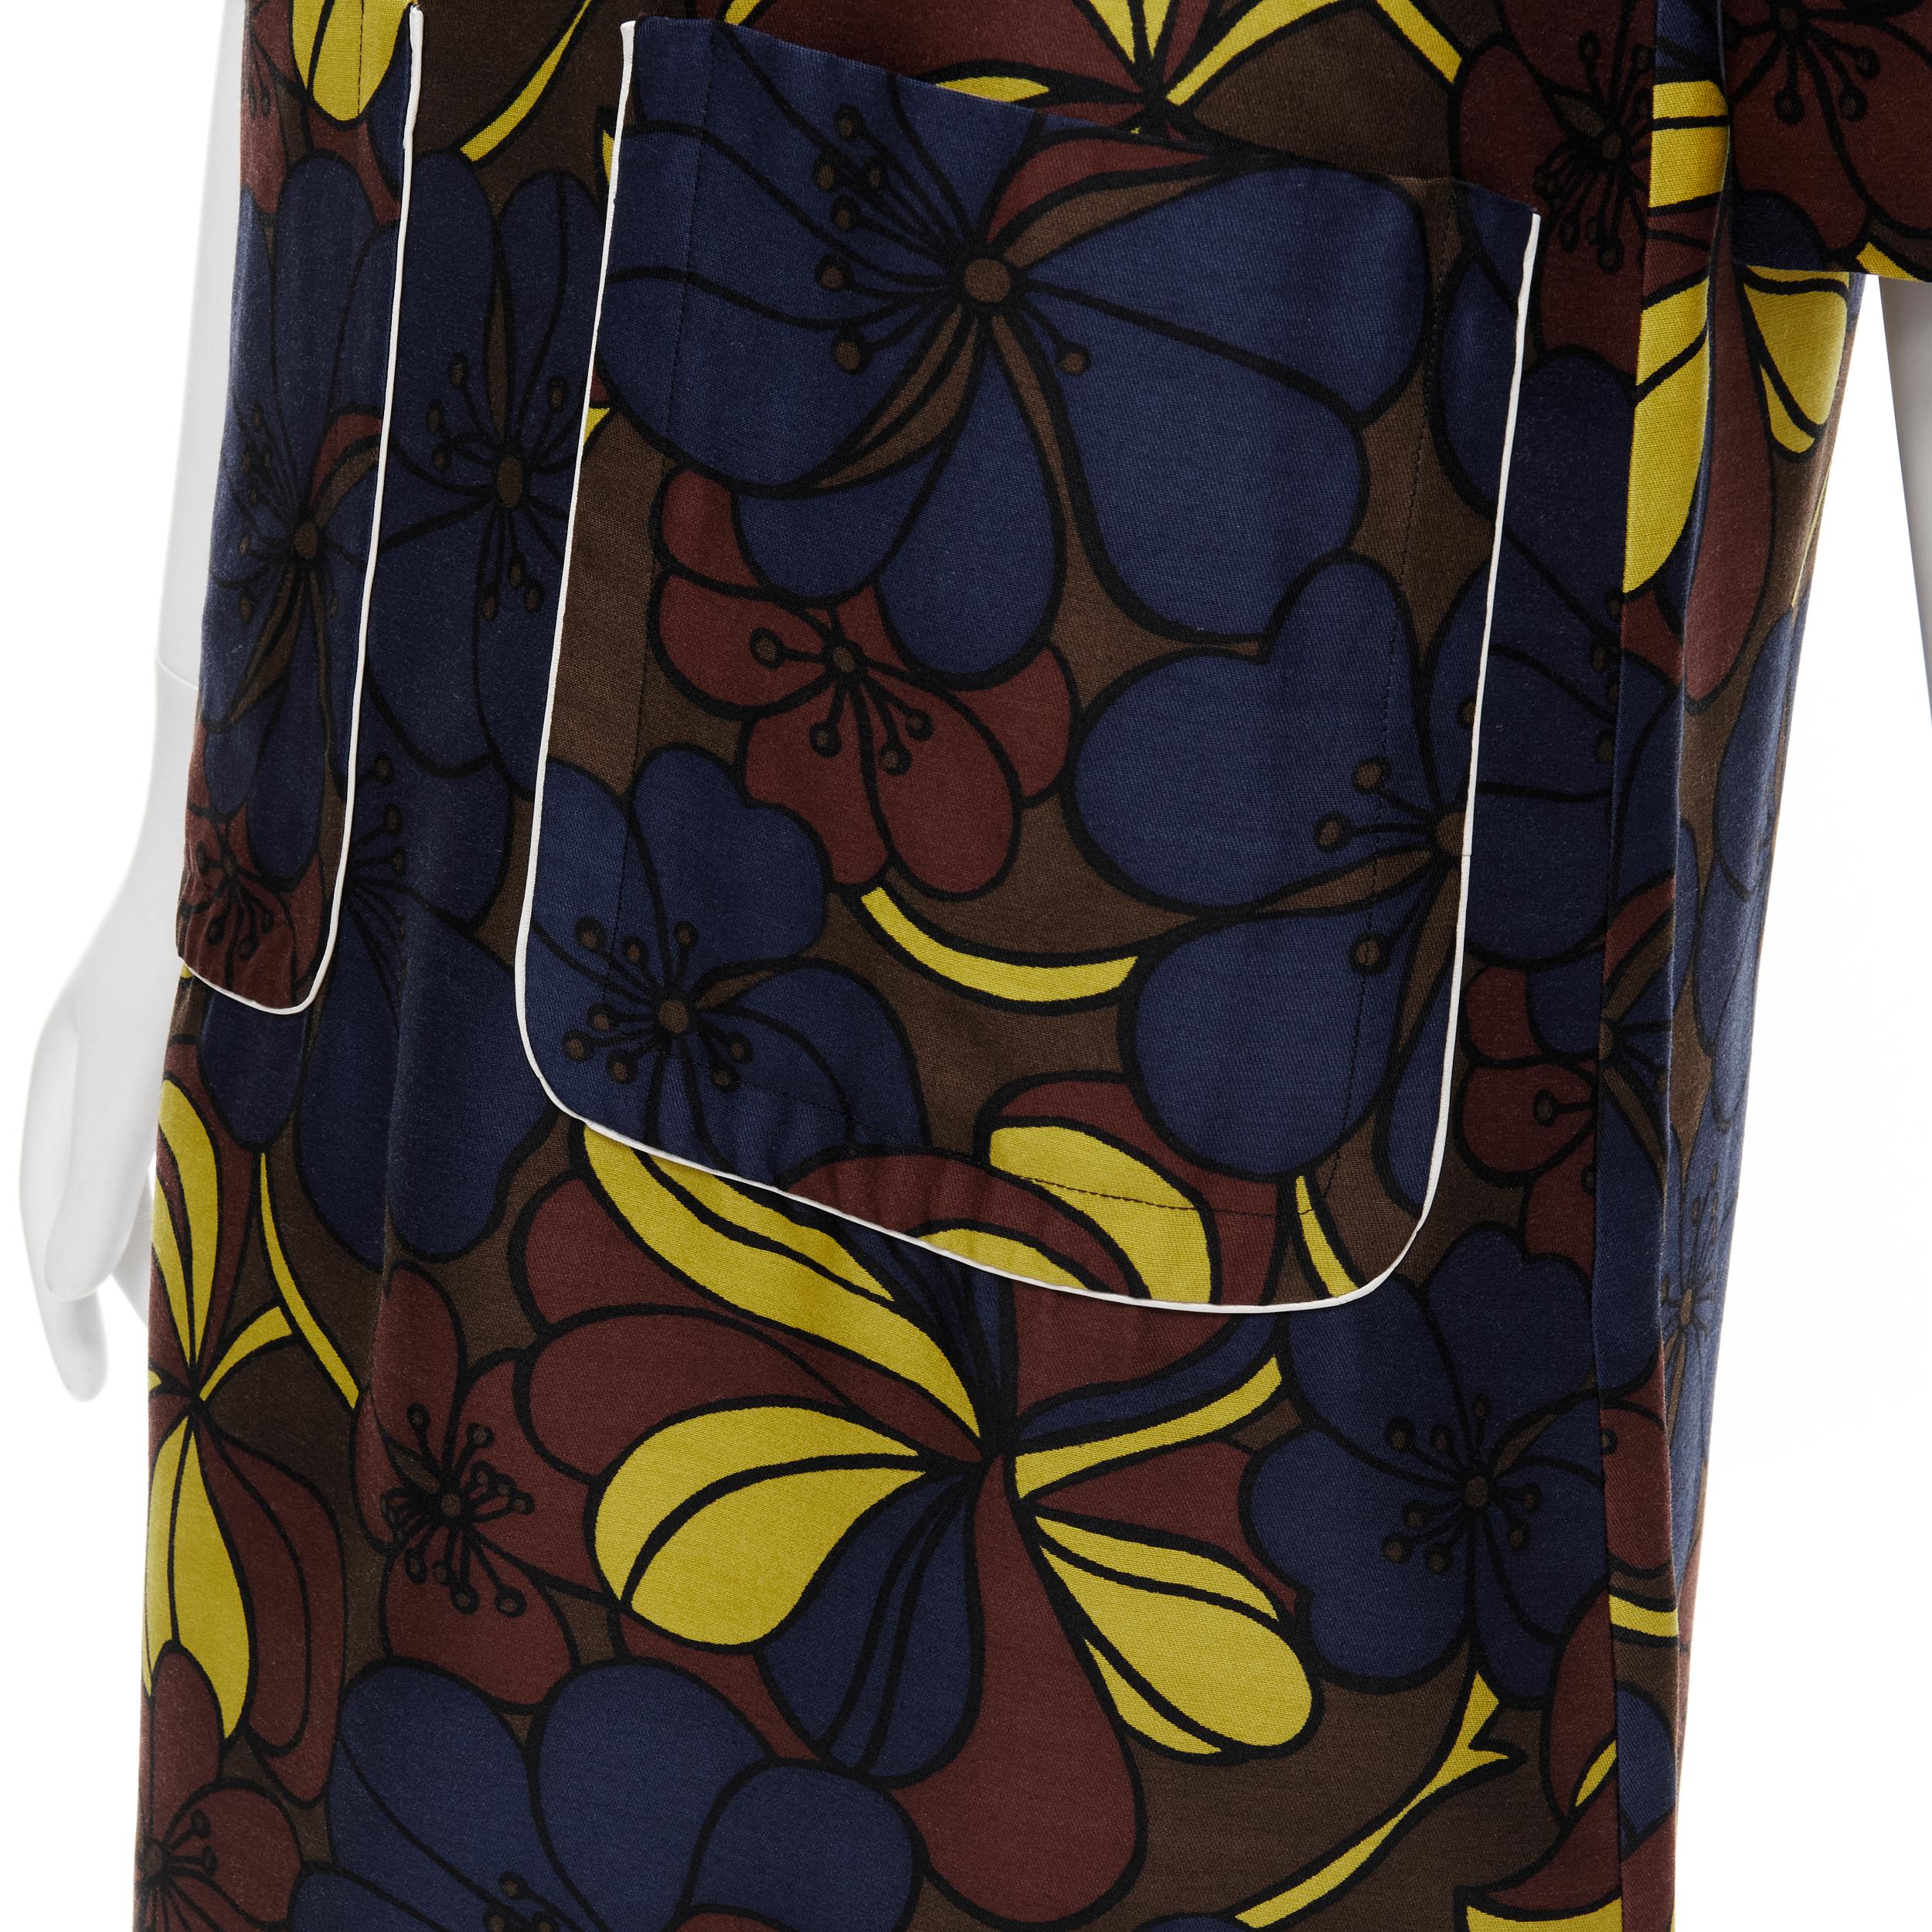 MARNI floral print wool silk crepe patch pocket boxy A-line dress IT38 XS 
Reference: CELG/A00178 
Brand: Marni 
Material: Wool 
Color: Brown 
Pattern: Floral 
Closure: Zip 
Made in: Italy 

CONDITION: 
Condition: Excellent, this item was pre-owned